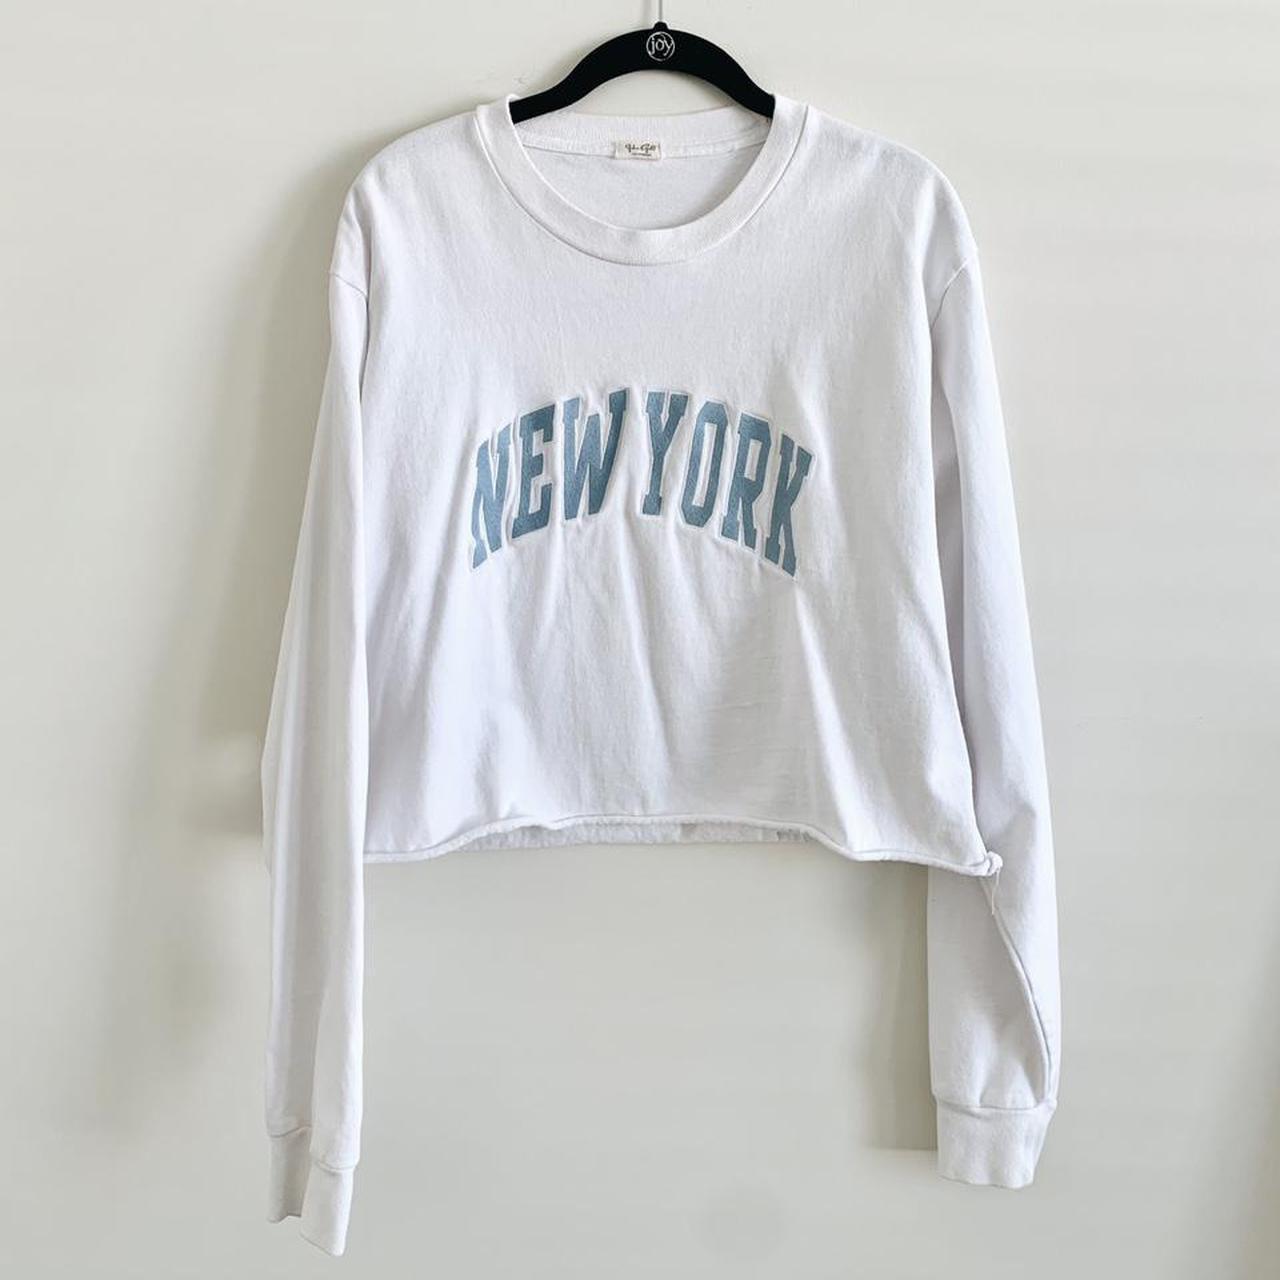 Brandy Melville white and blue new york embroidered